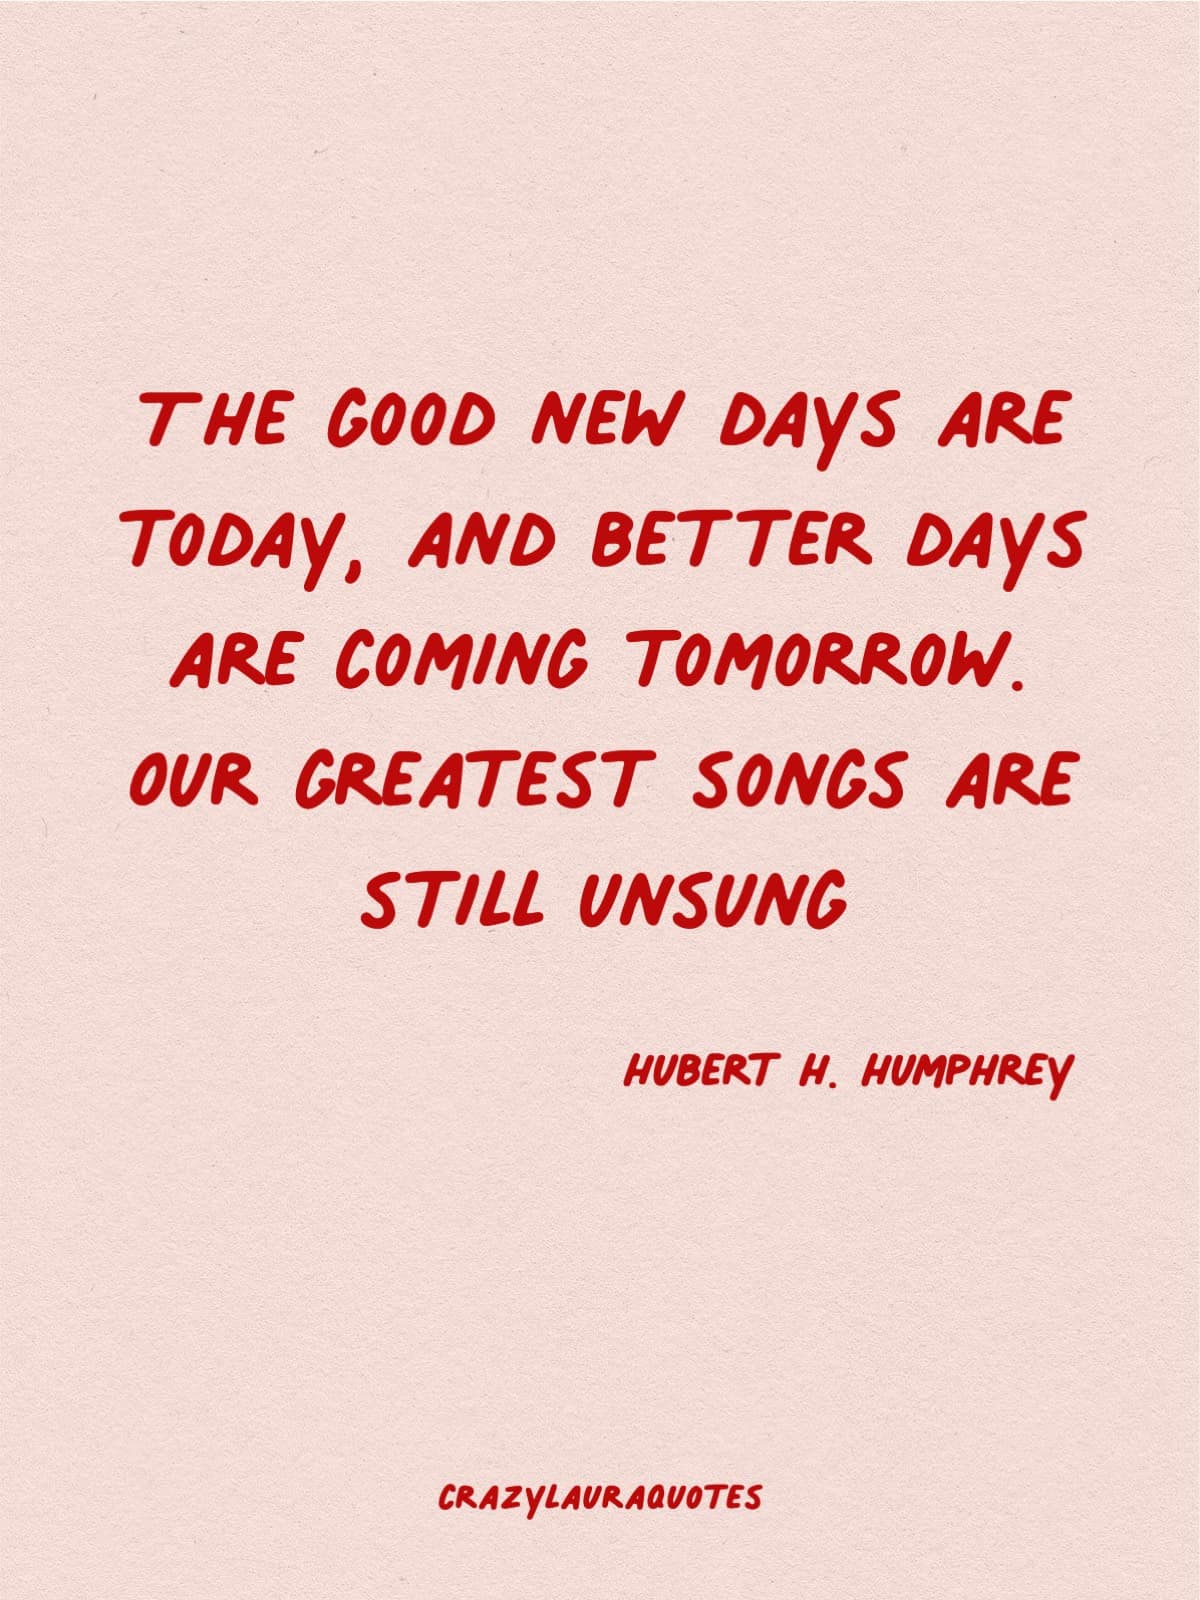 inspiration on better days quote